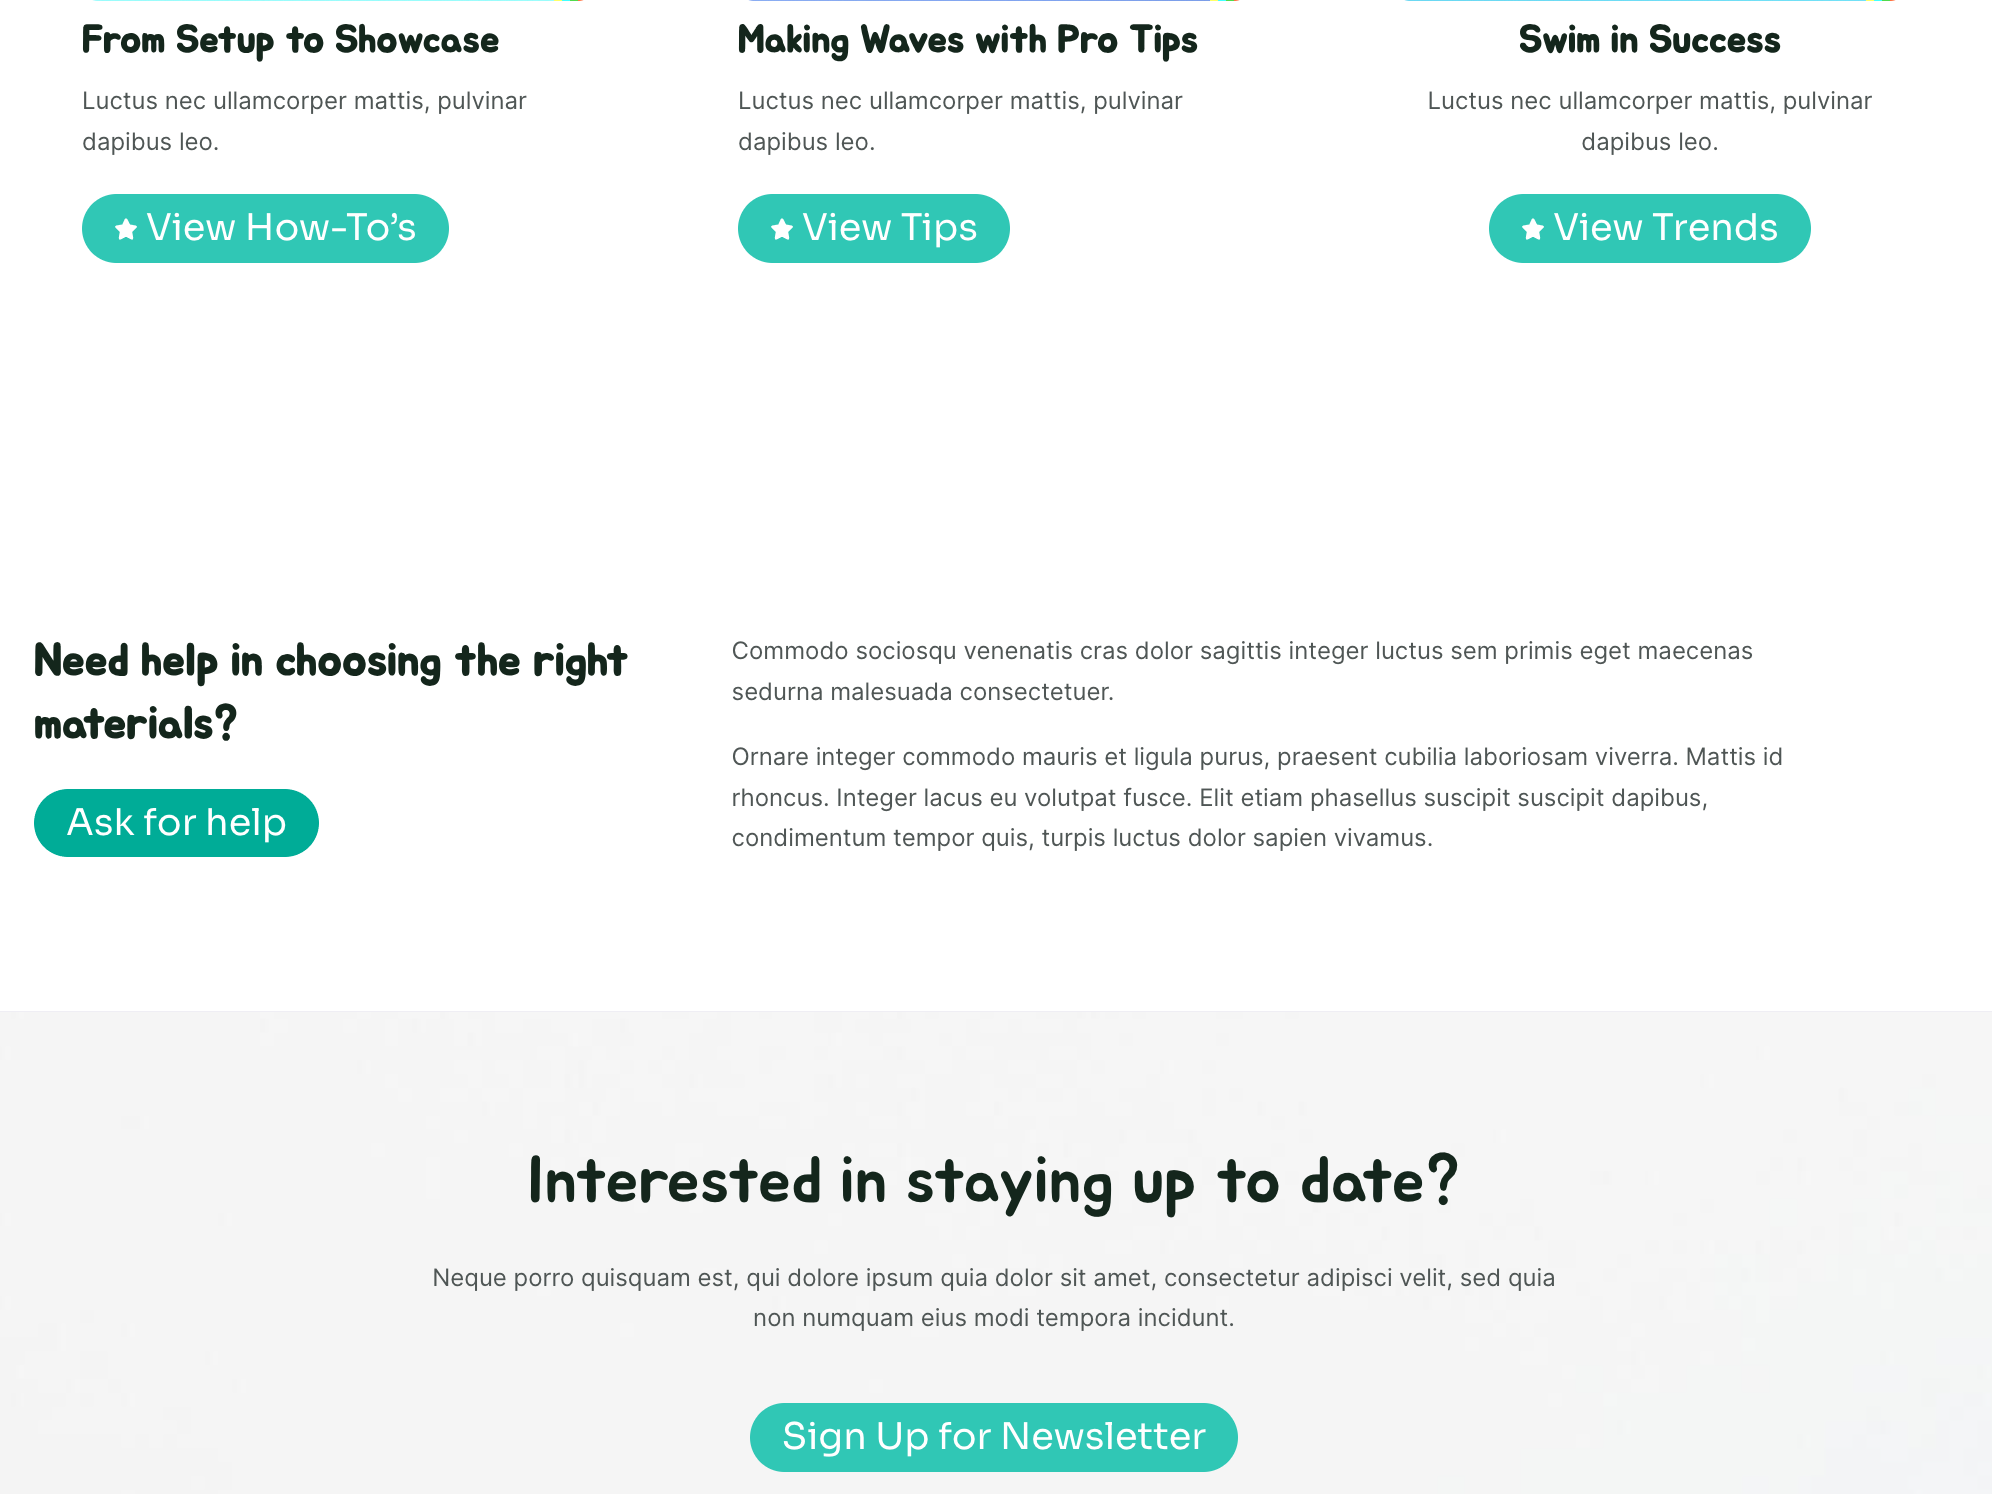 lorem ipsum text on the landing page of the website